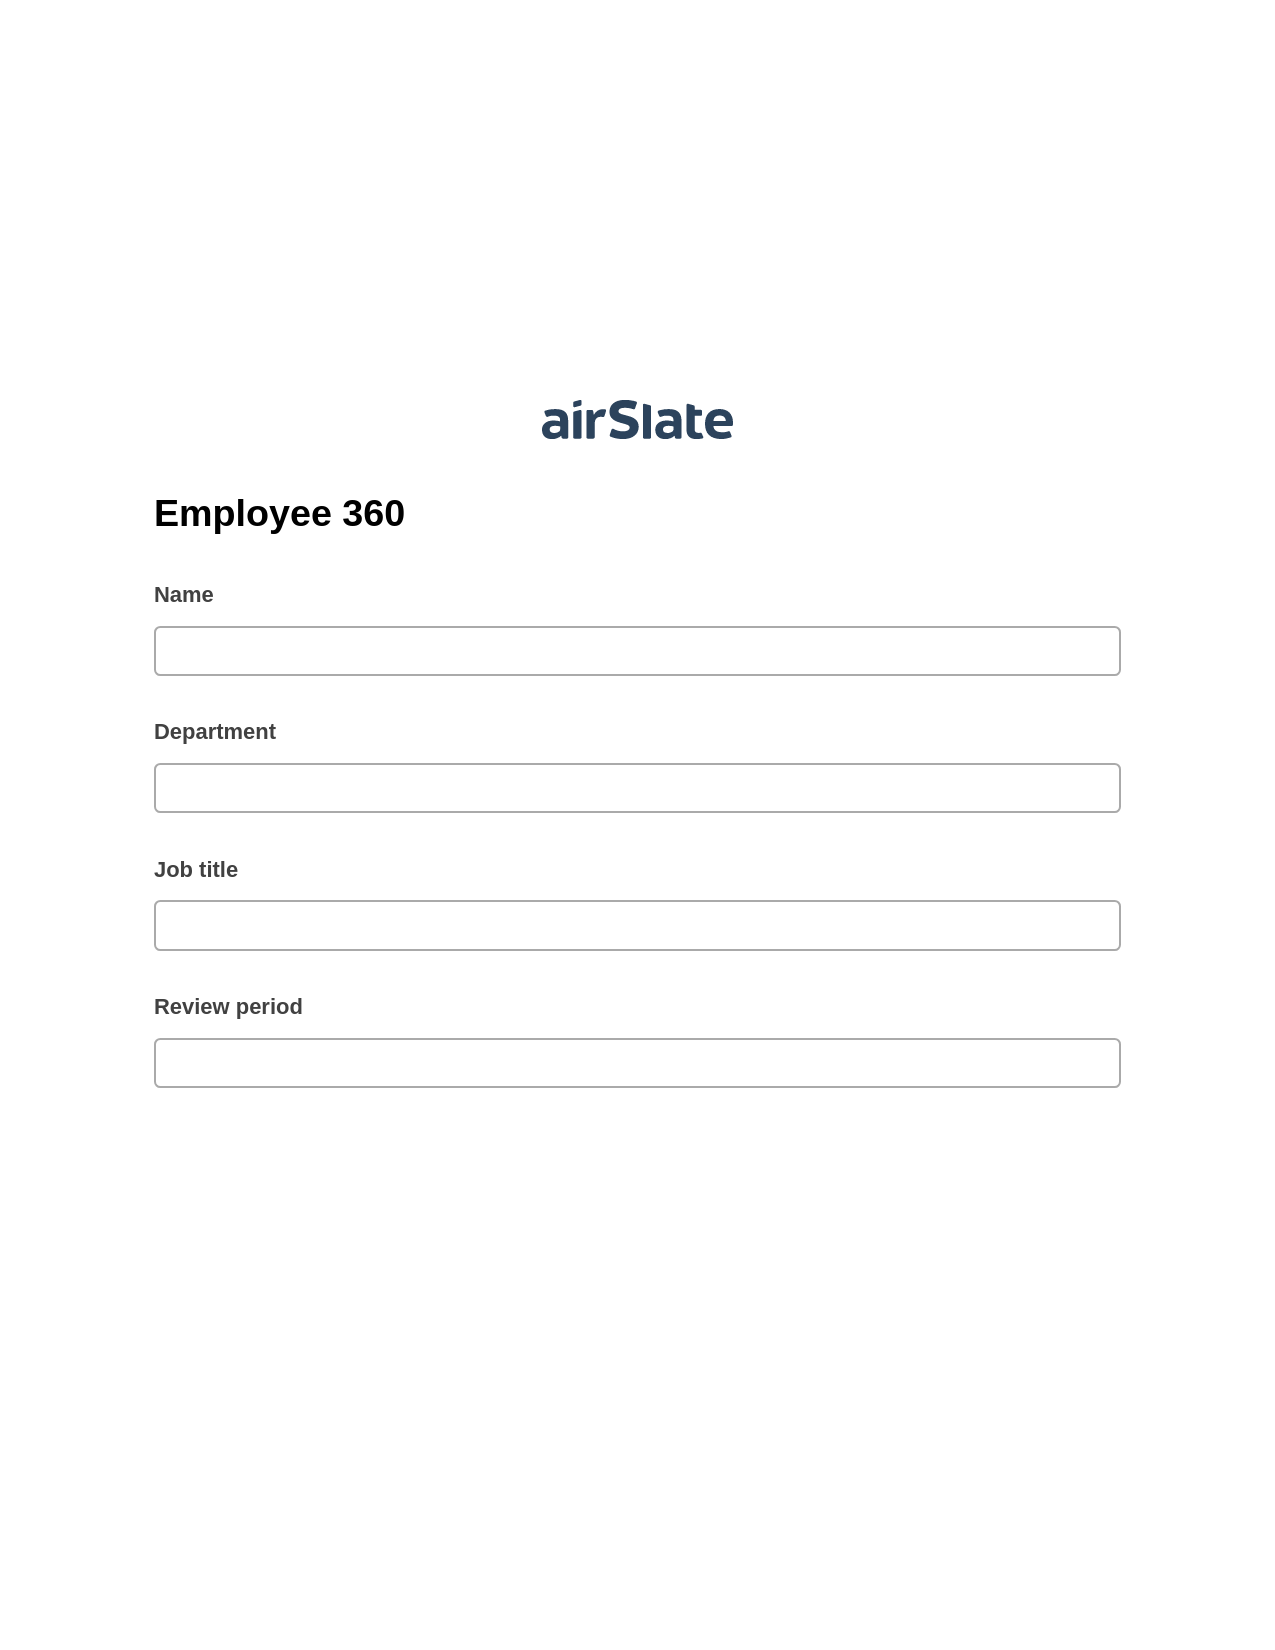 Employee 360 Pre-fill from Google Sheets Bot, Lock the Slate Bot, Archive to Dropbox Bot